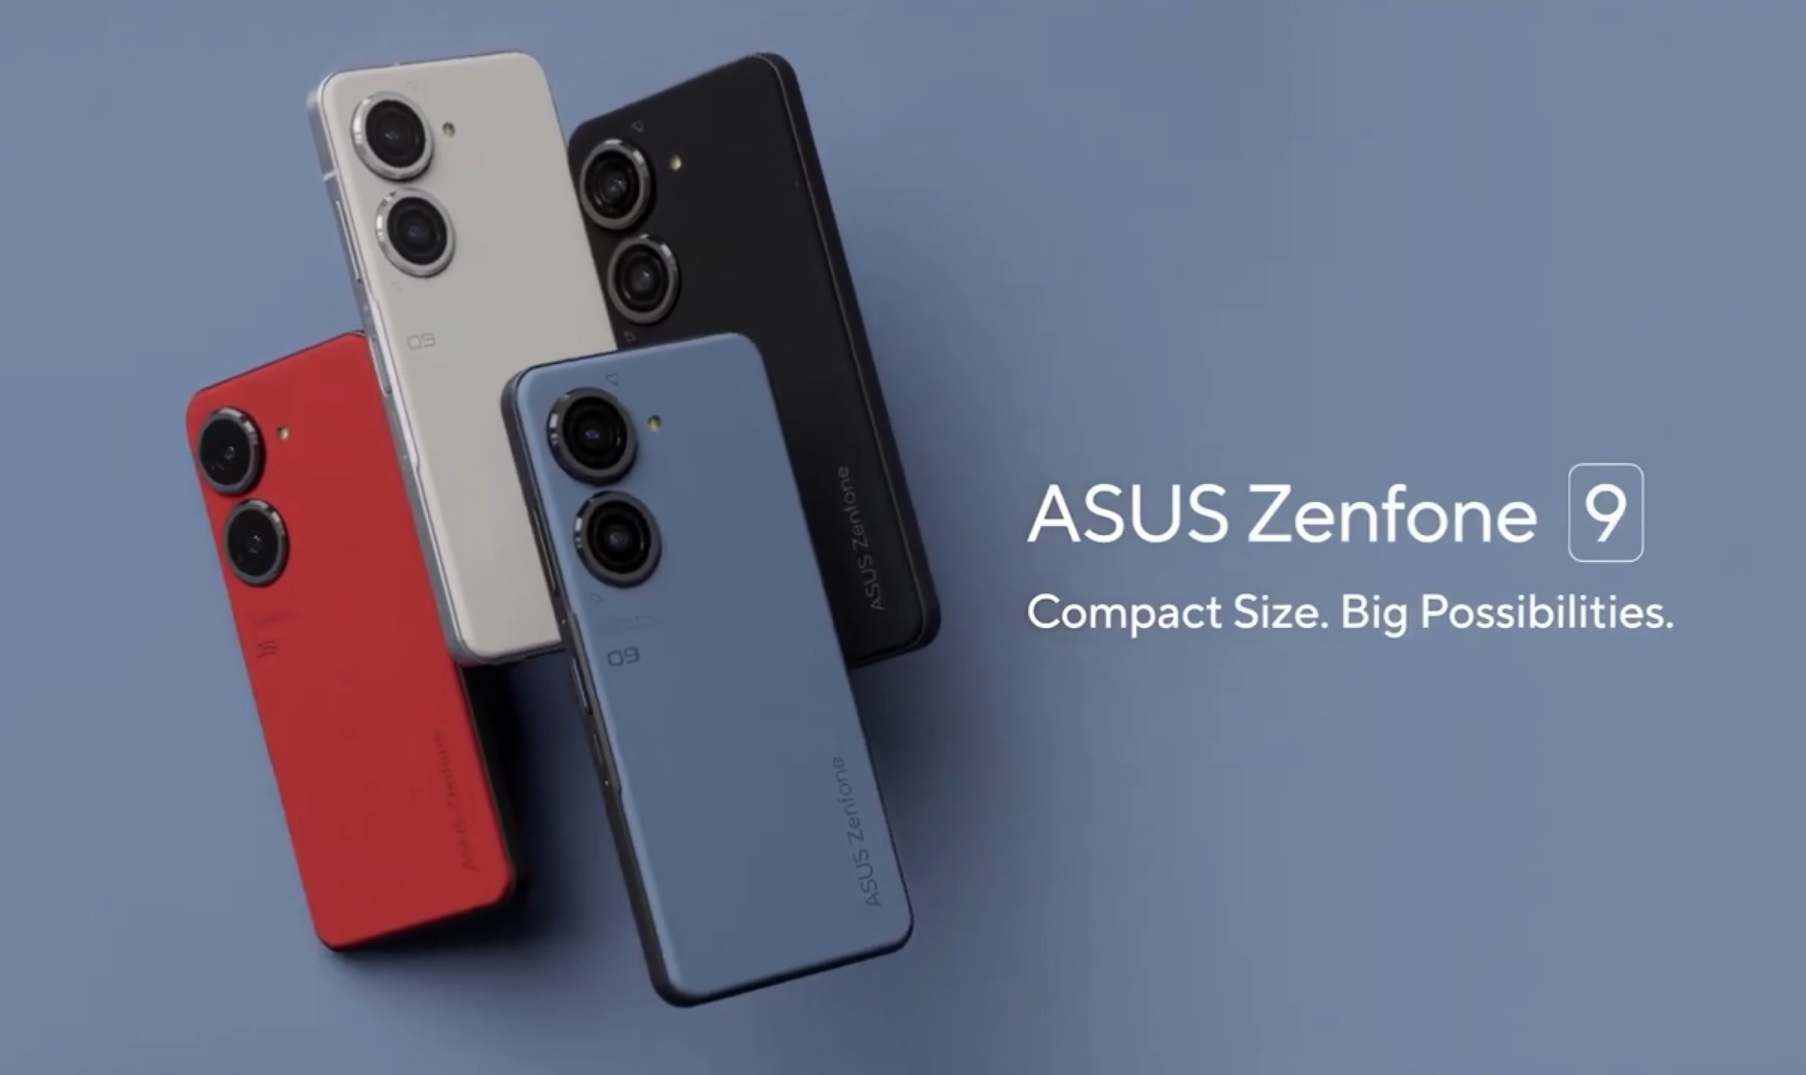 Screenshot from the video showing the new ASUS Zenfone 9.